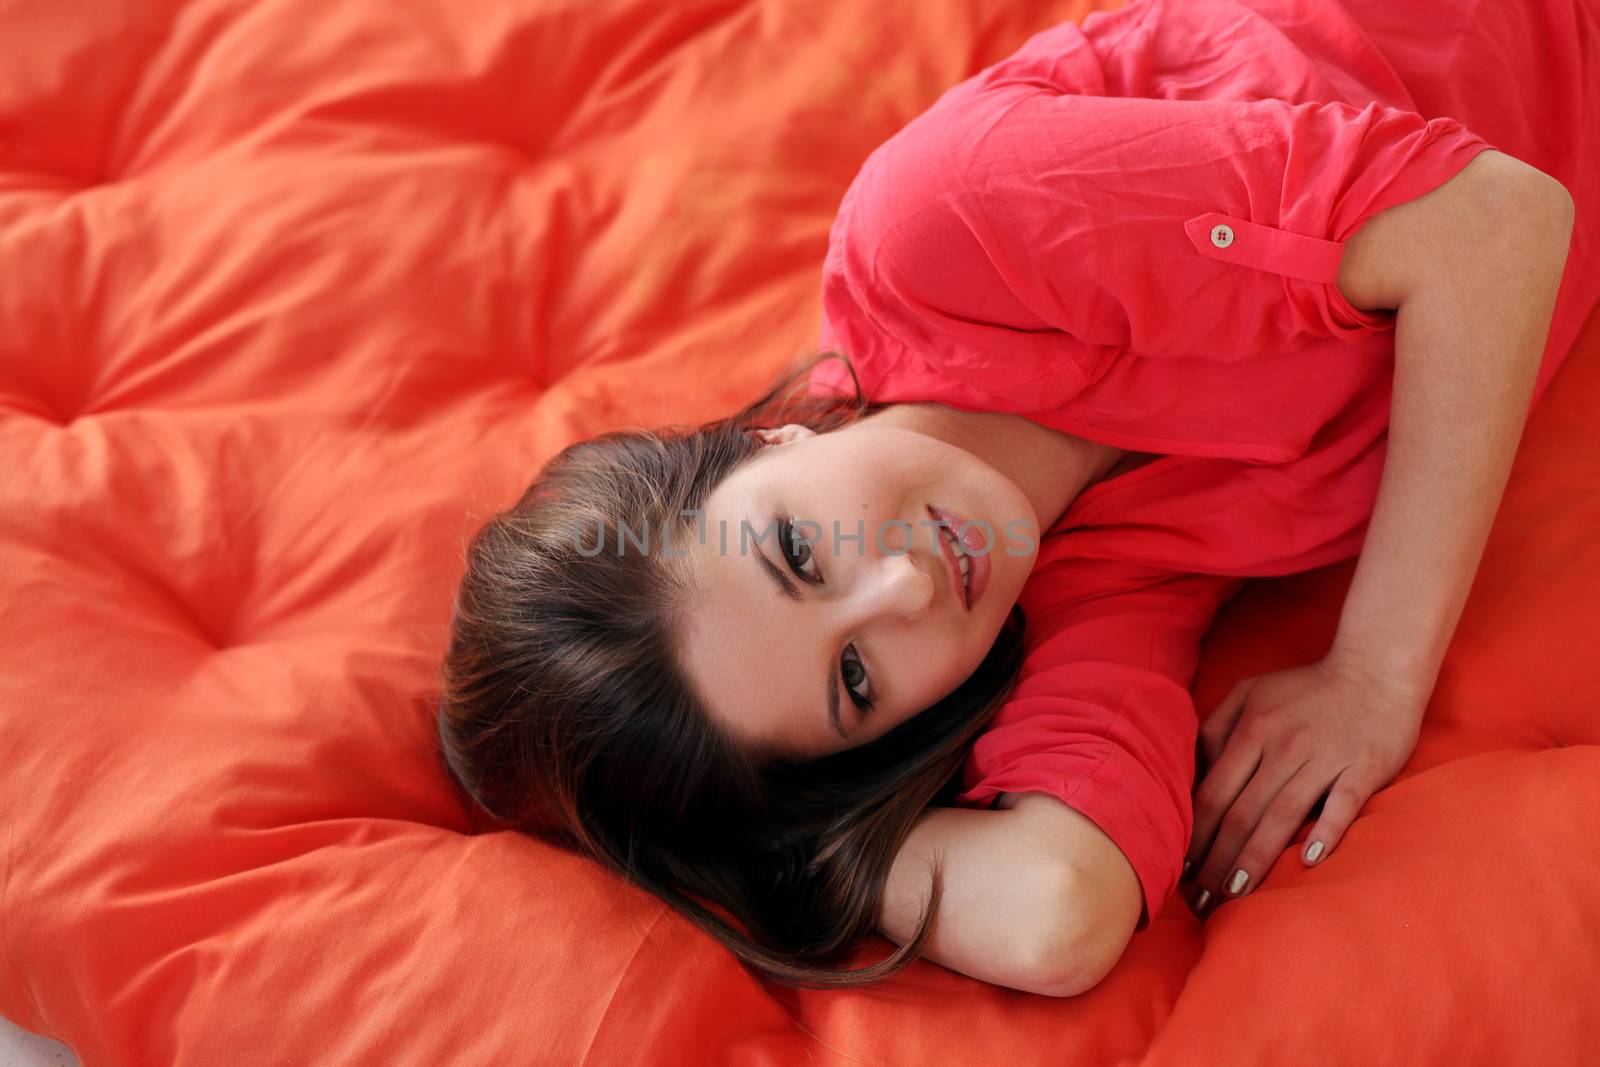 Sensual young woman dreaming on an orange blanket